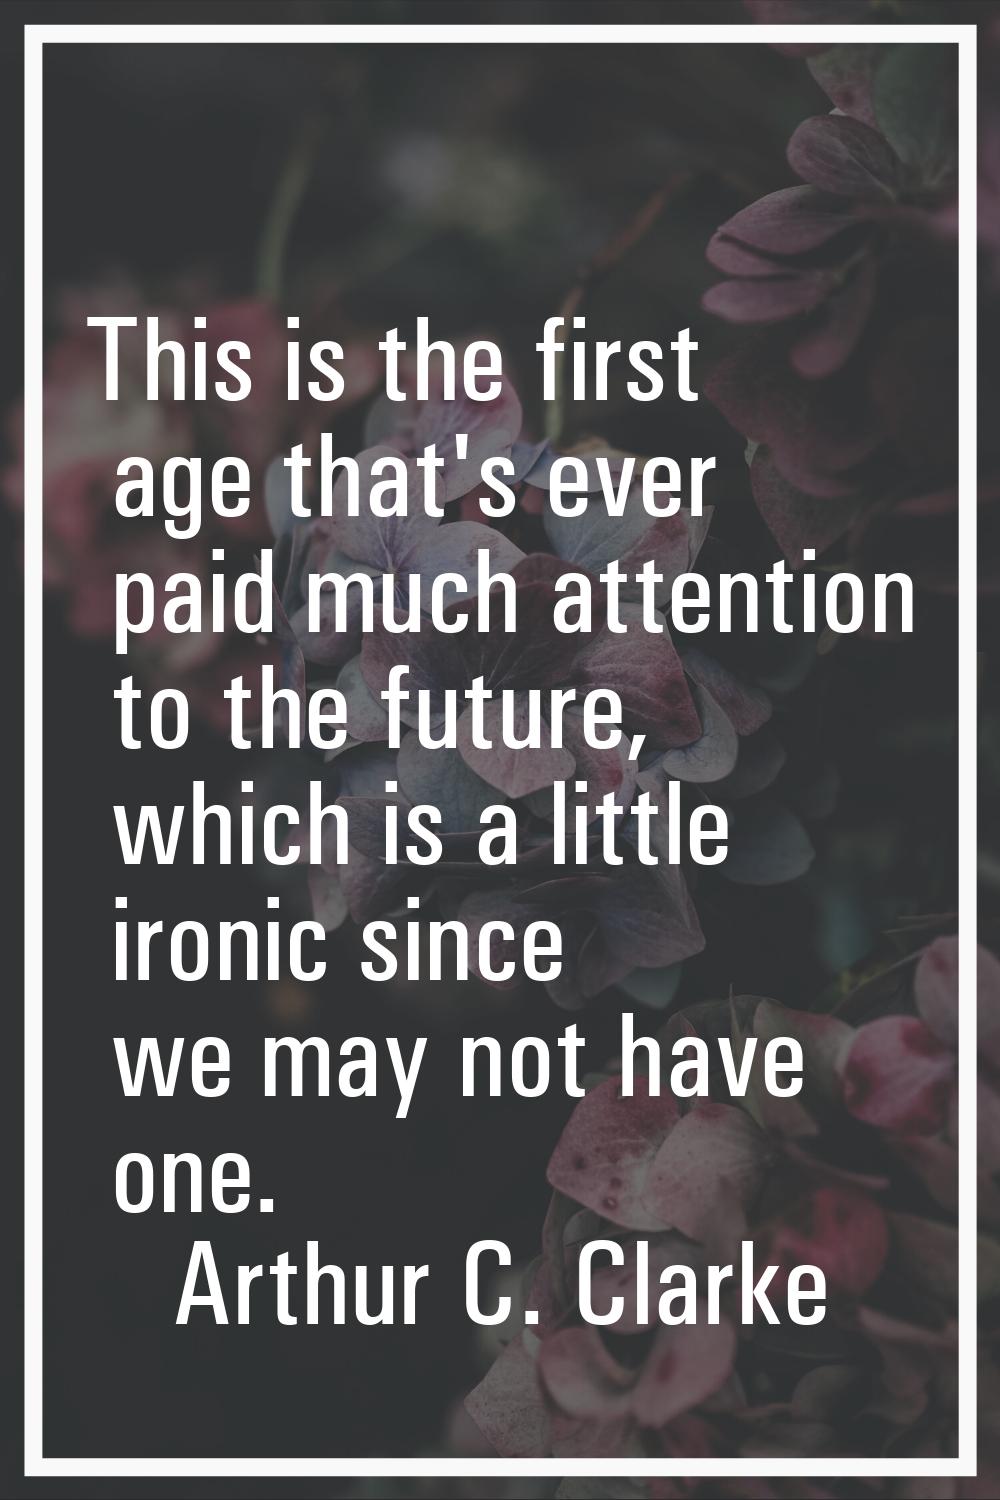 This is the first age that's ever paid much attention to the future, which is a little ironic since